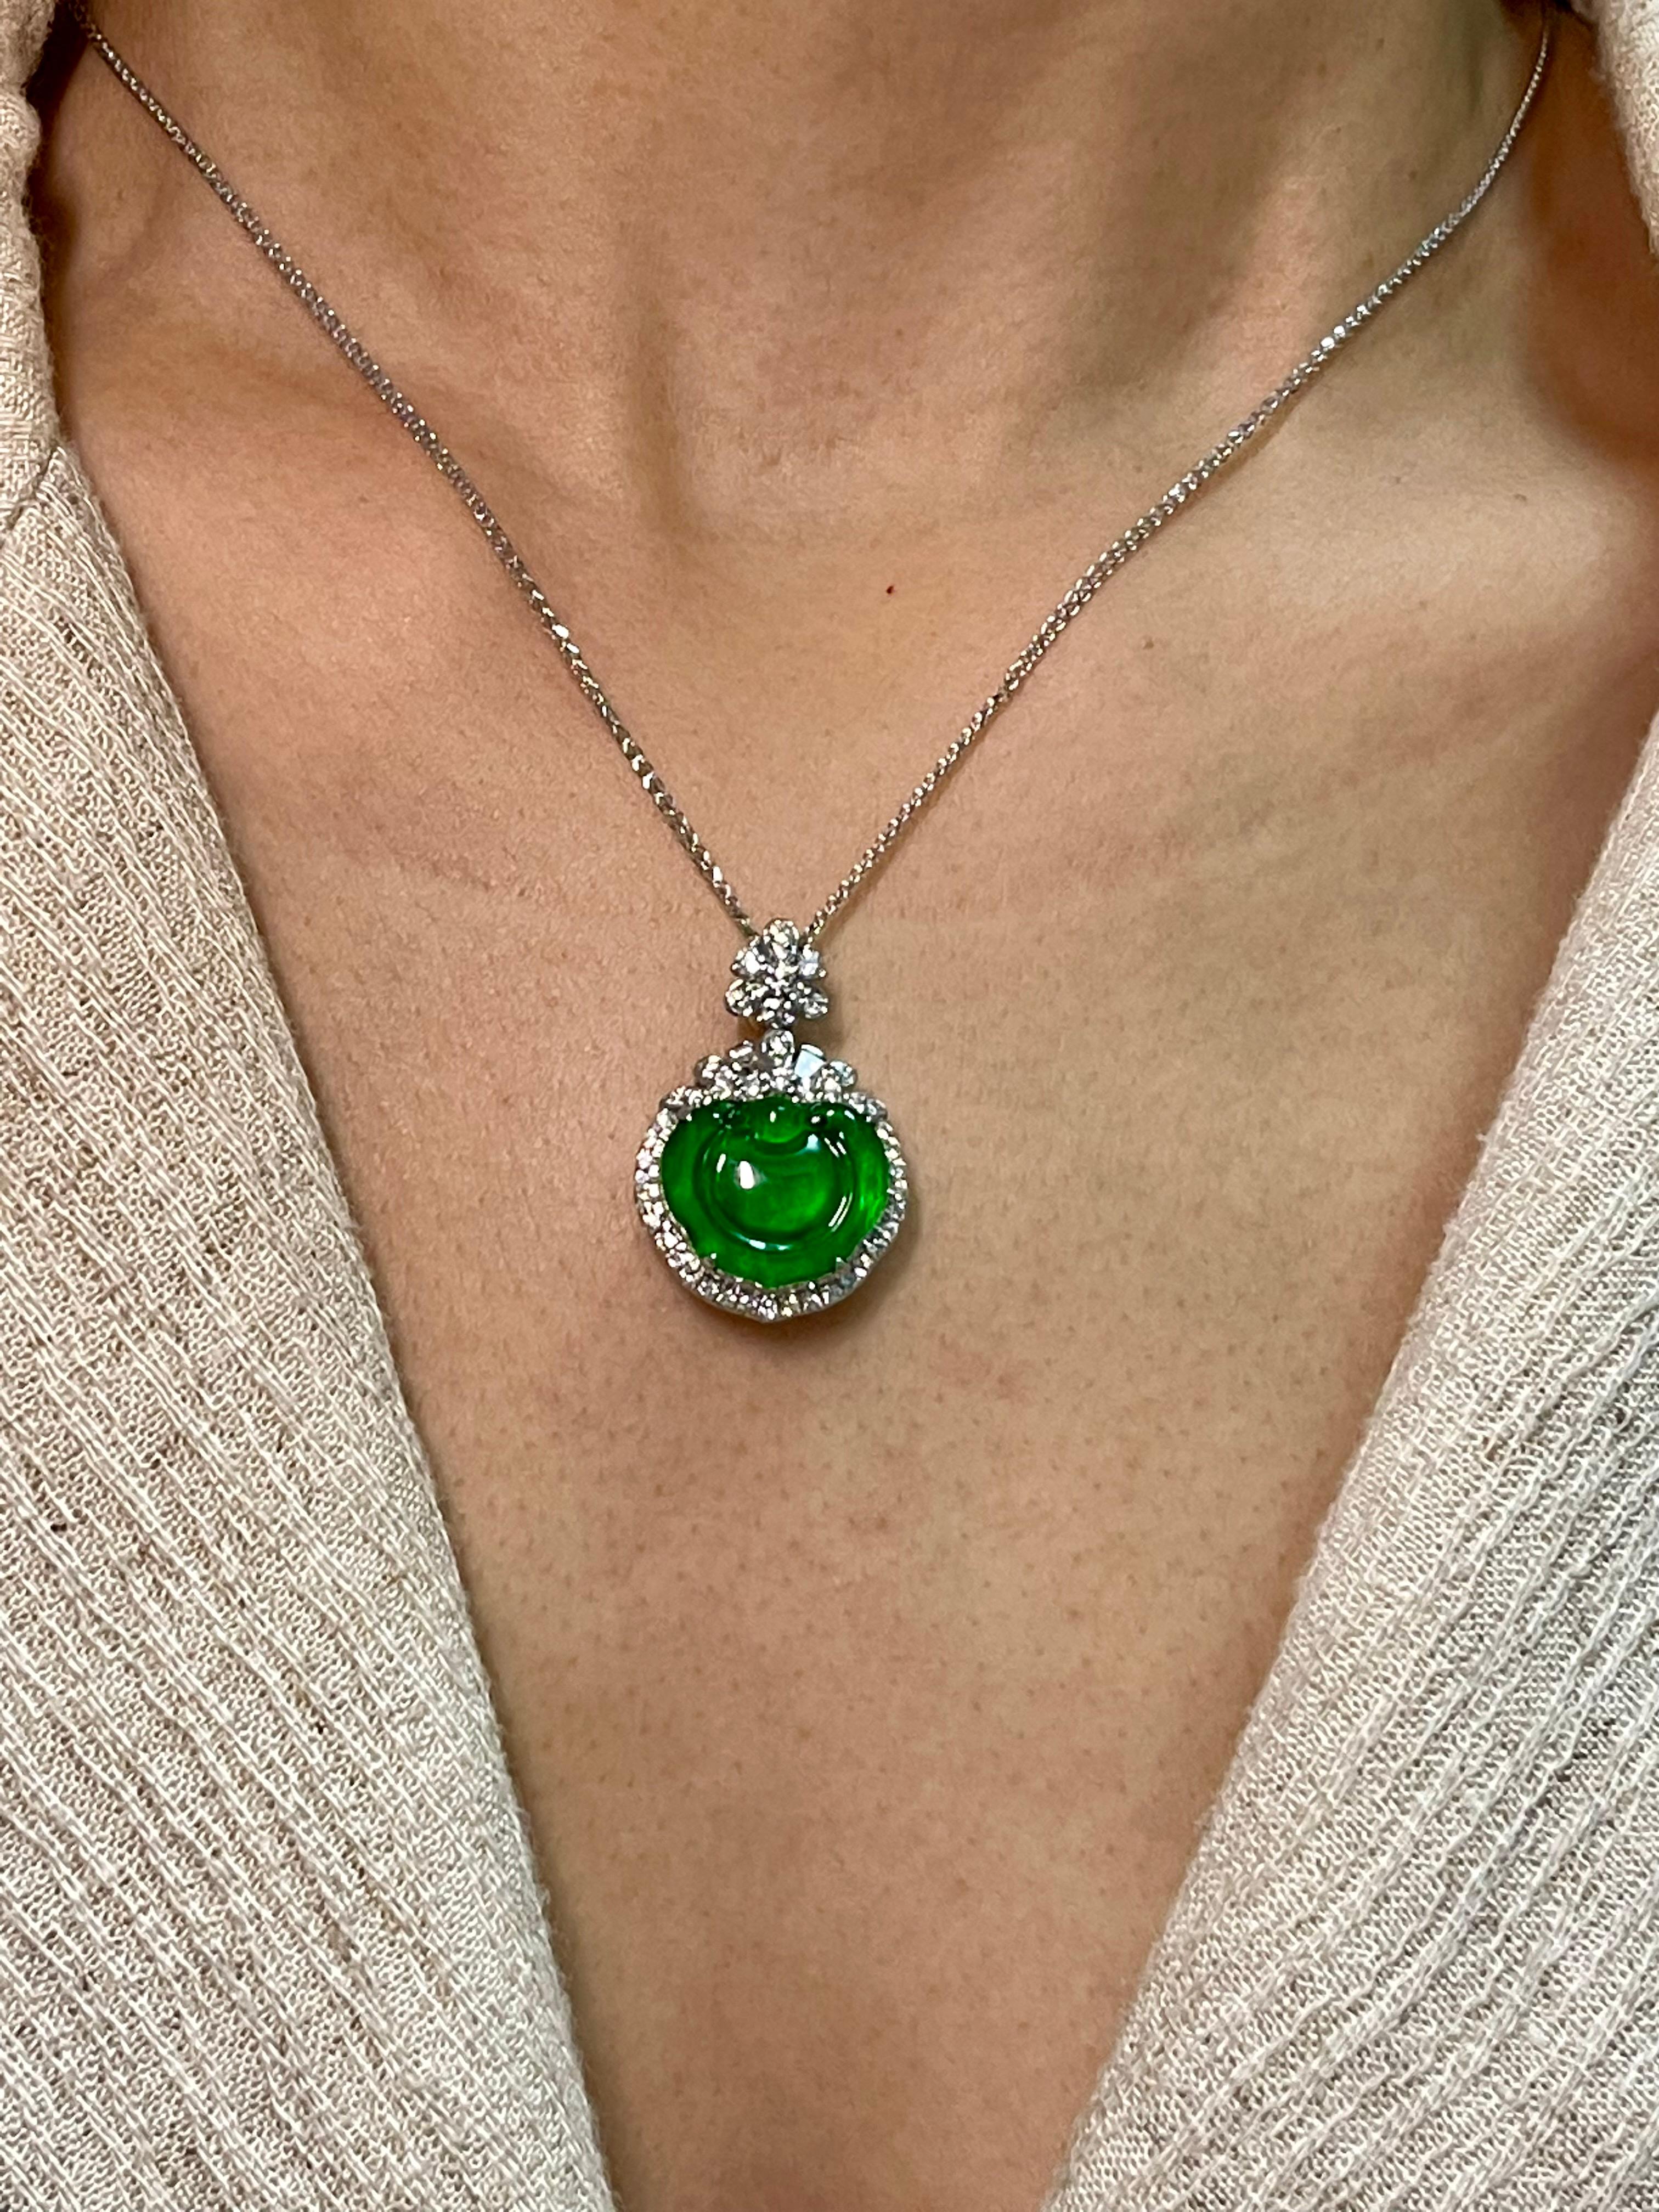 Please check out the HD video. This jade has a beautiful balance of color saturation and transparency! Here is a natural apple green Jade and diamond pendant. It is certified by 2 labs. The pendant is set in 18k white gold and diamonds. There are